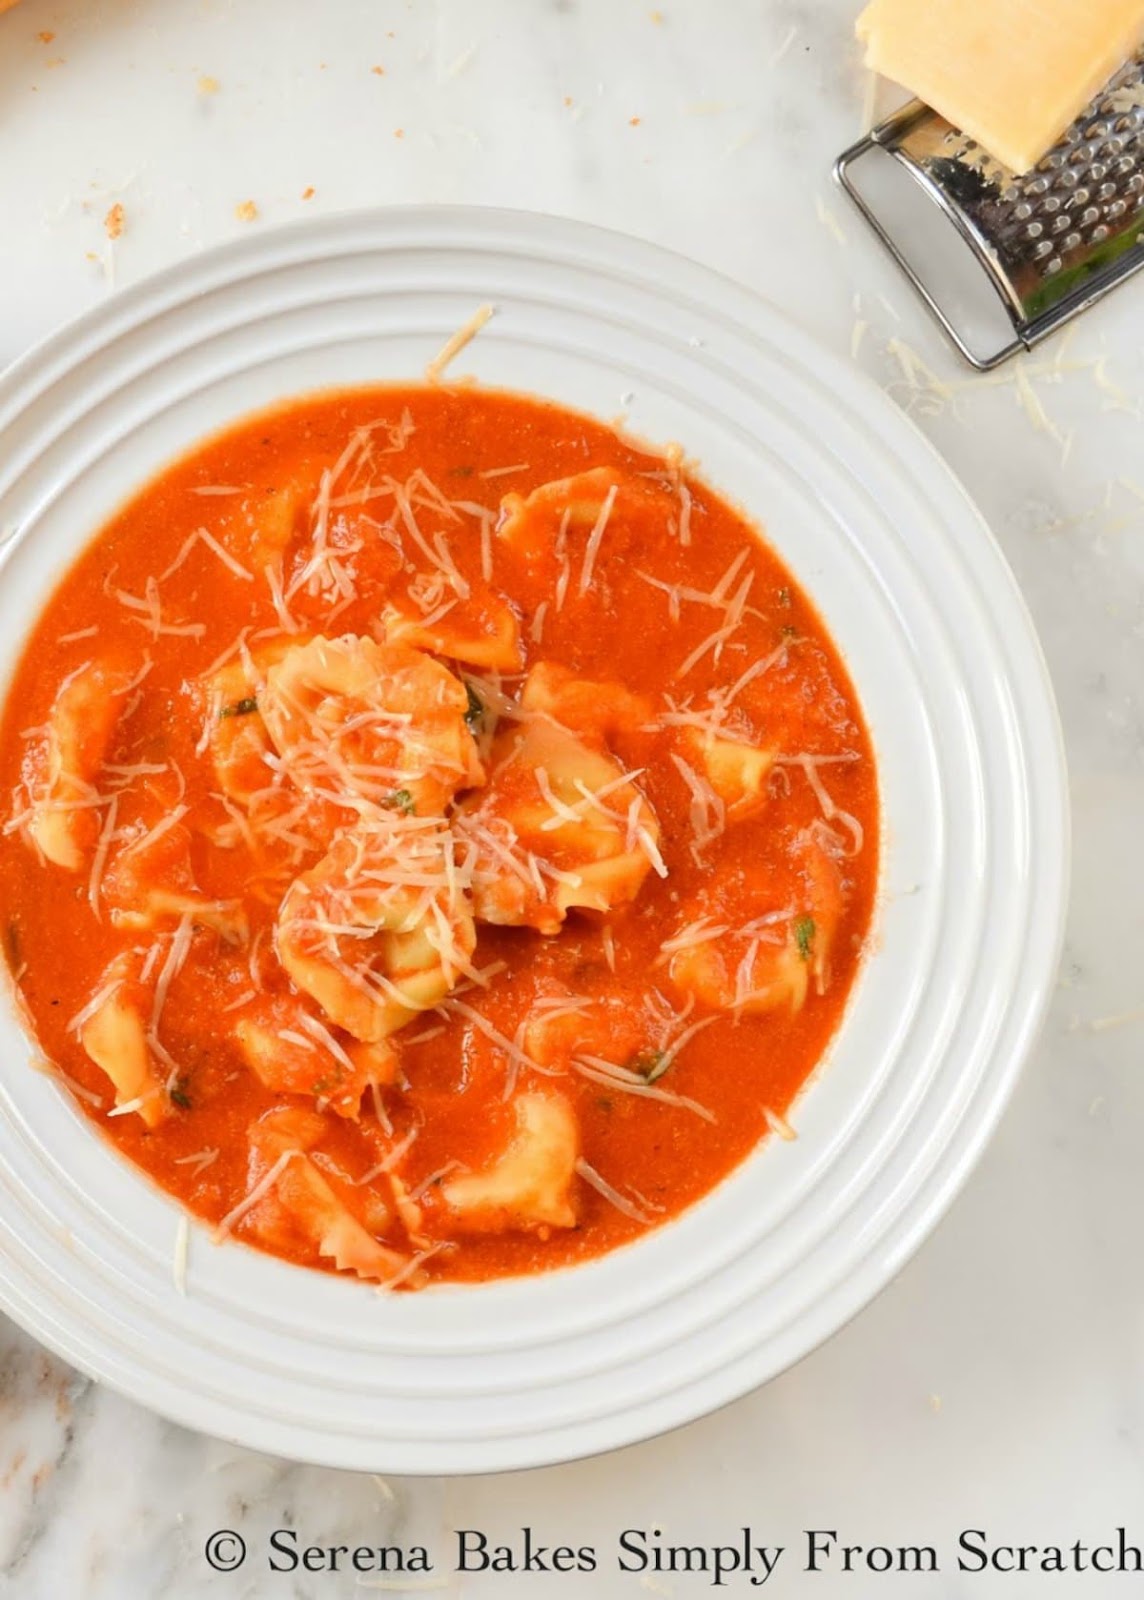 Creamy Tomato Tortellini Soup is an easy to make recipe in under 30 minutes. Great for lunch or dinner from Serena Bakes Simply From Scratch.